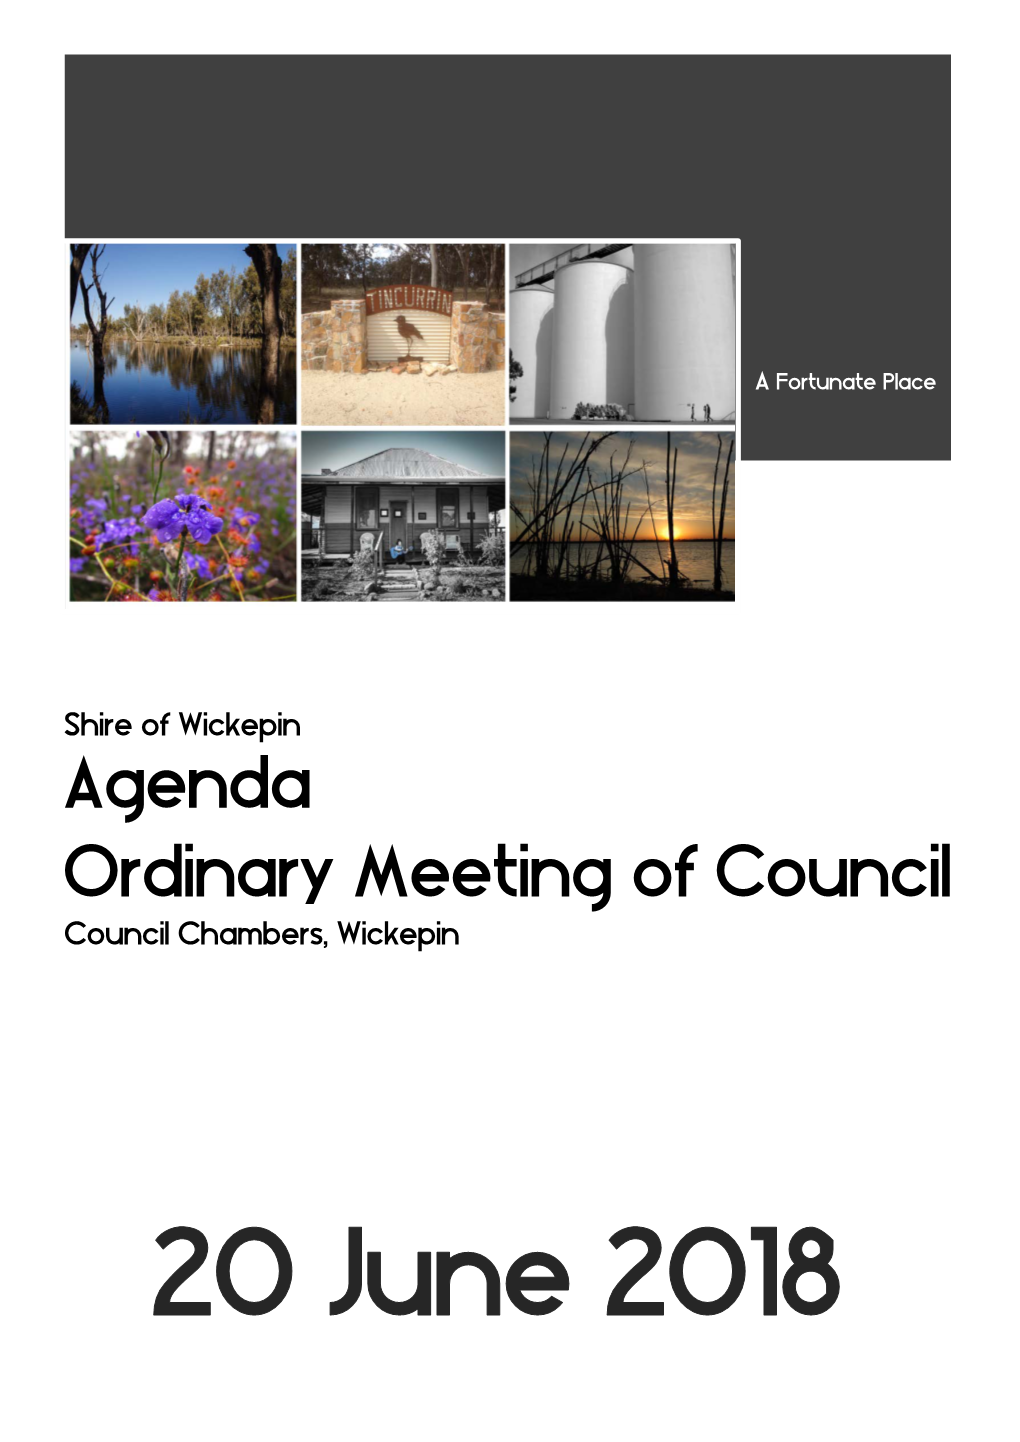 Agenda Ordinary Meeting of Council Council Chambers, Wickepin